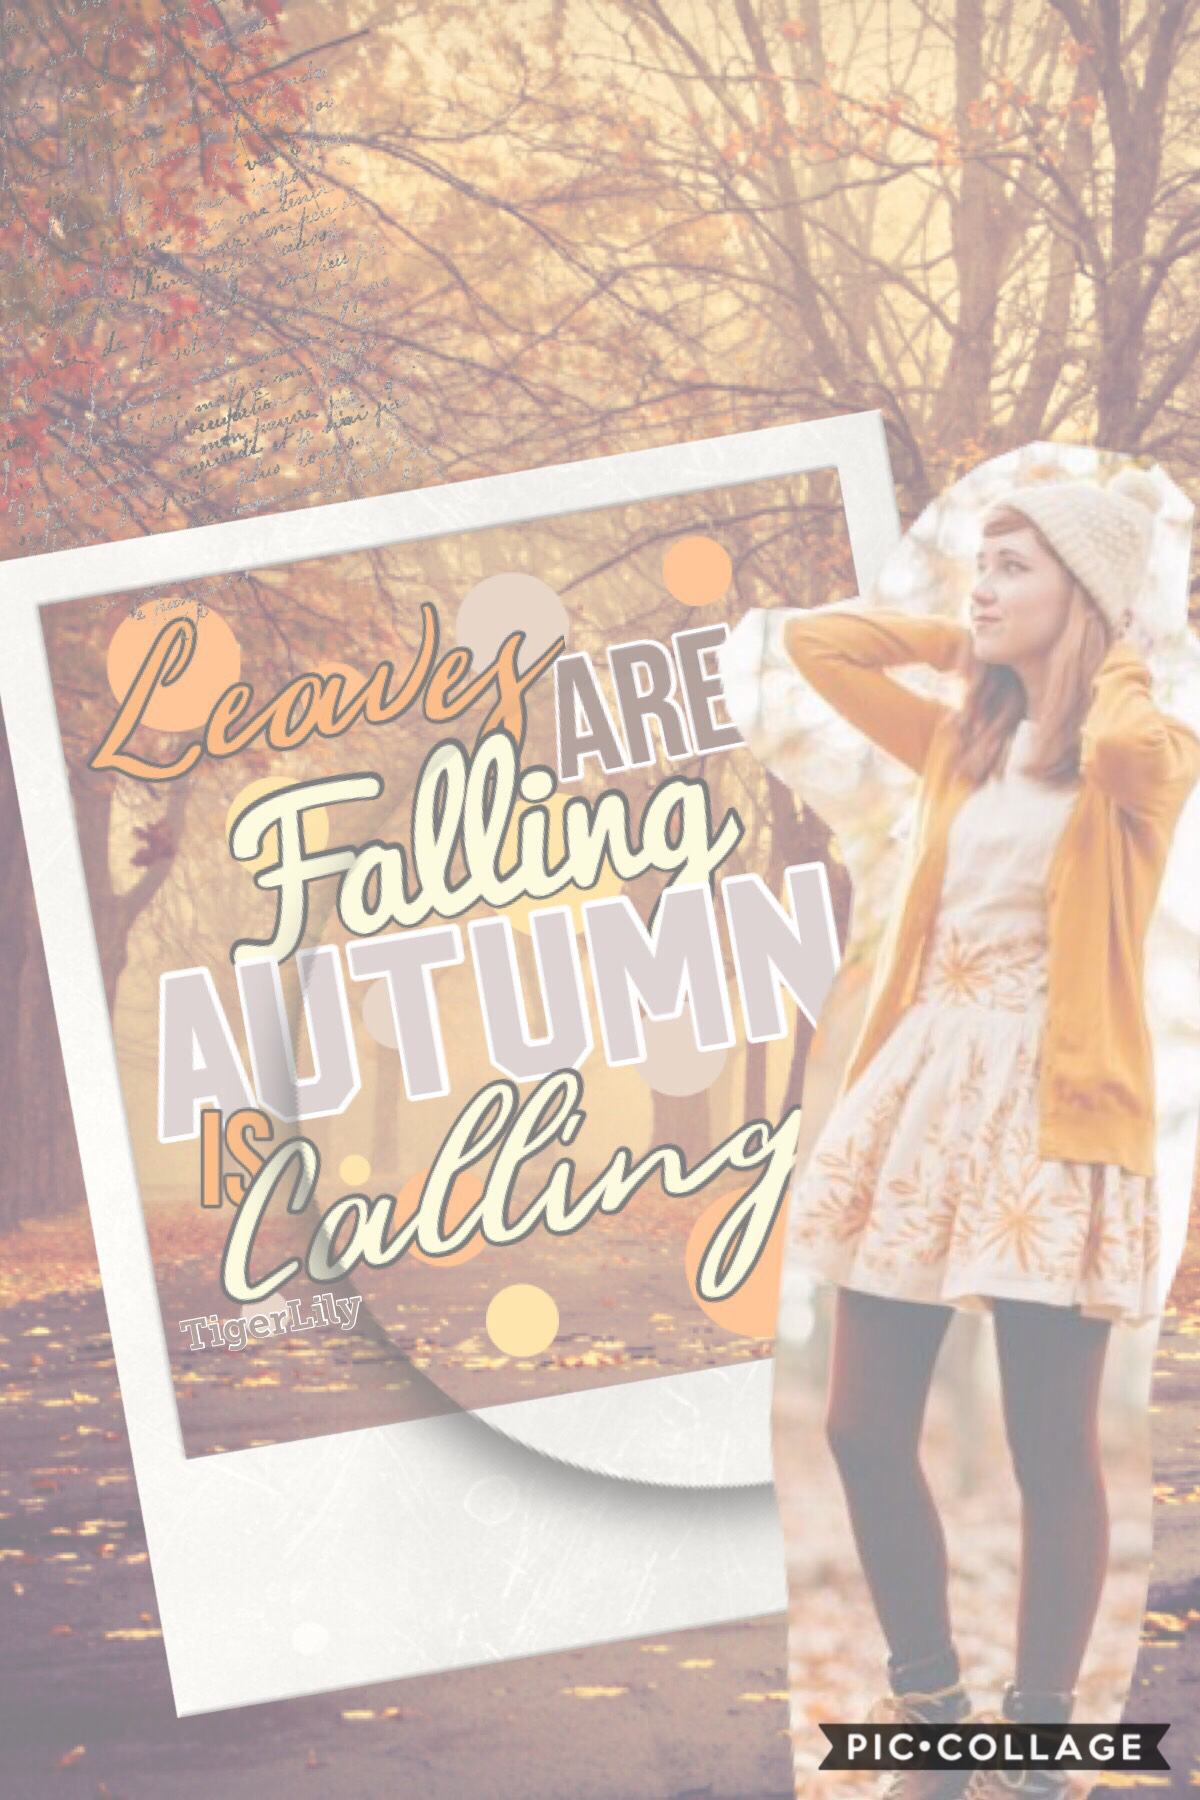 🍂TAP🍂
So I know I just posted a collage yesterday... but I just finished this AND I LOVE IT. What do y’all think about it? I have another question. What is your favorite season? My favorite season is fall! I love it and I’m so excited it’s here 😁